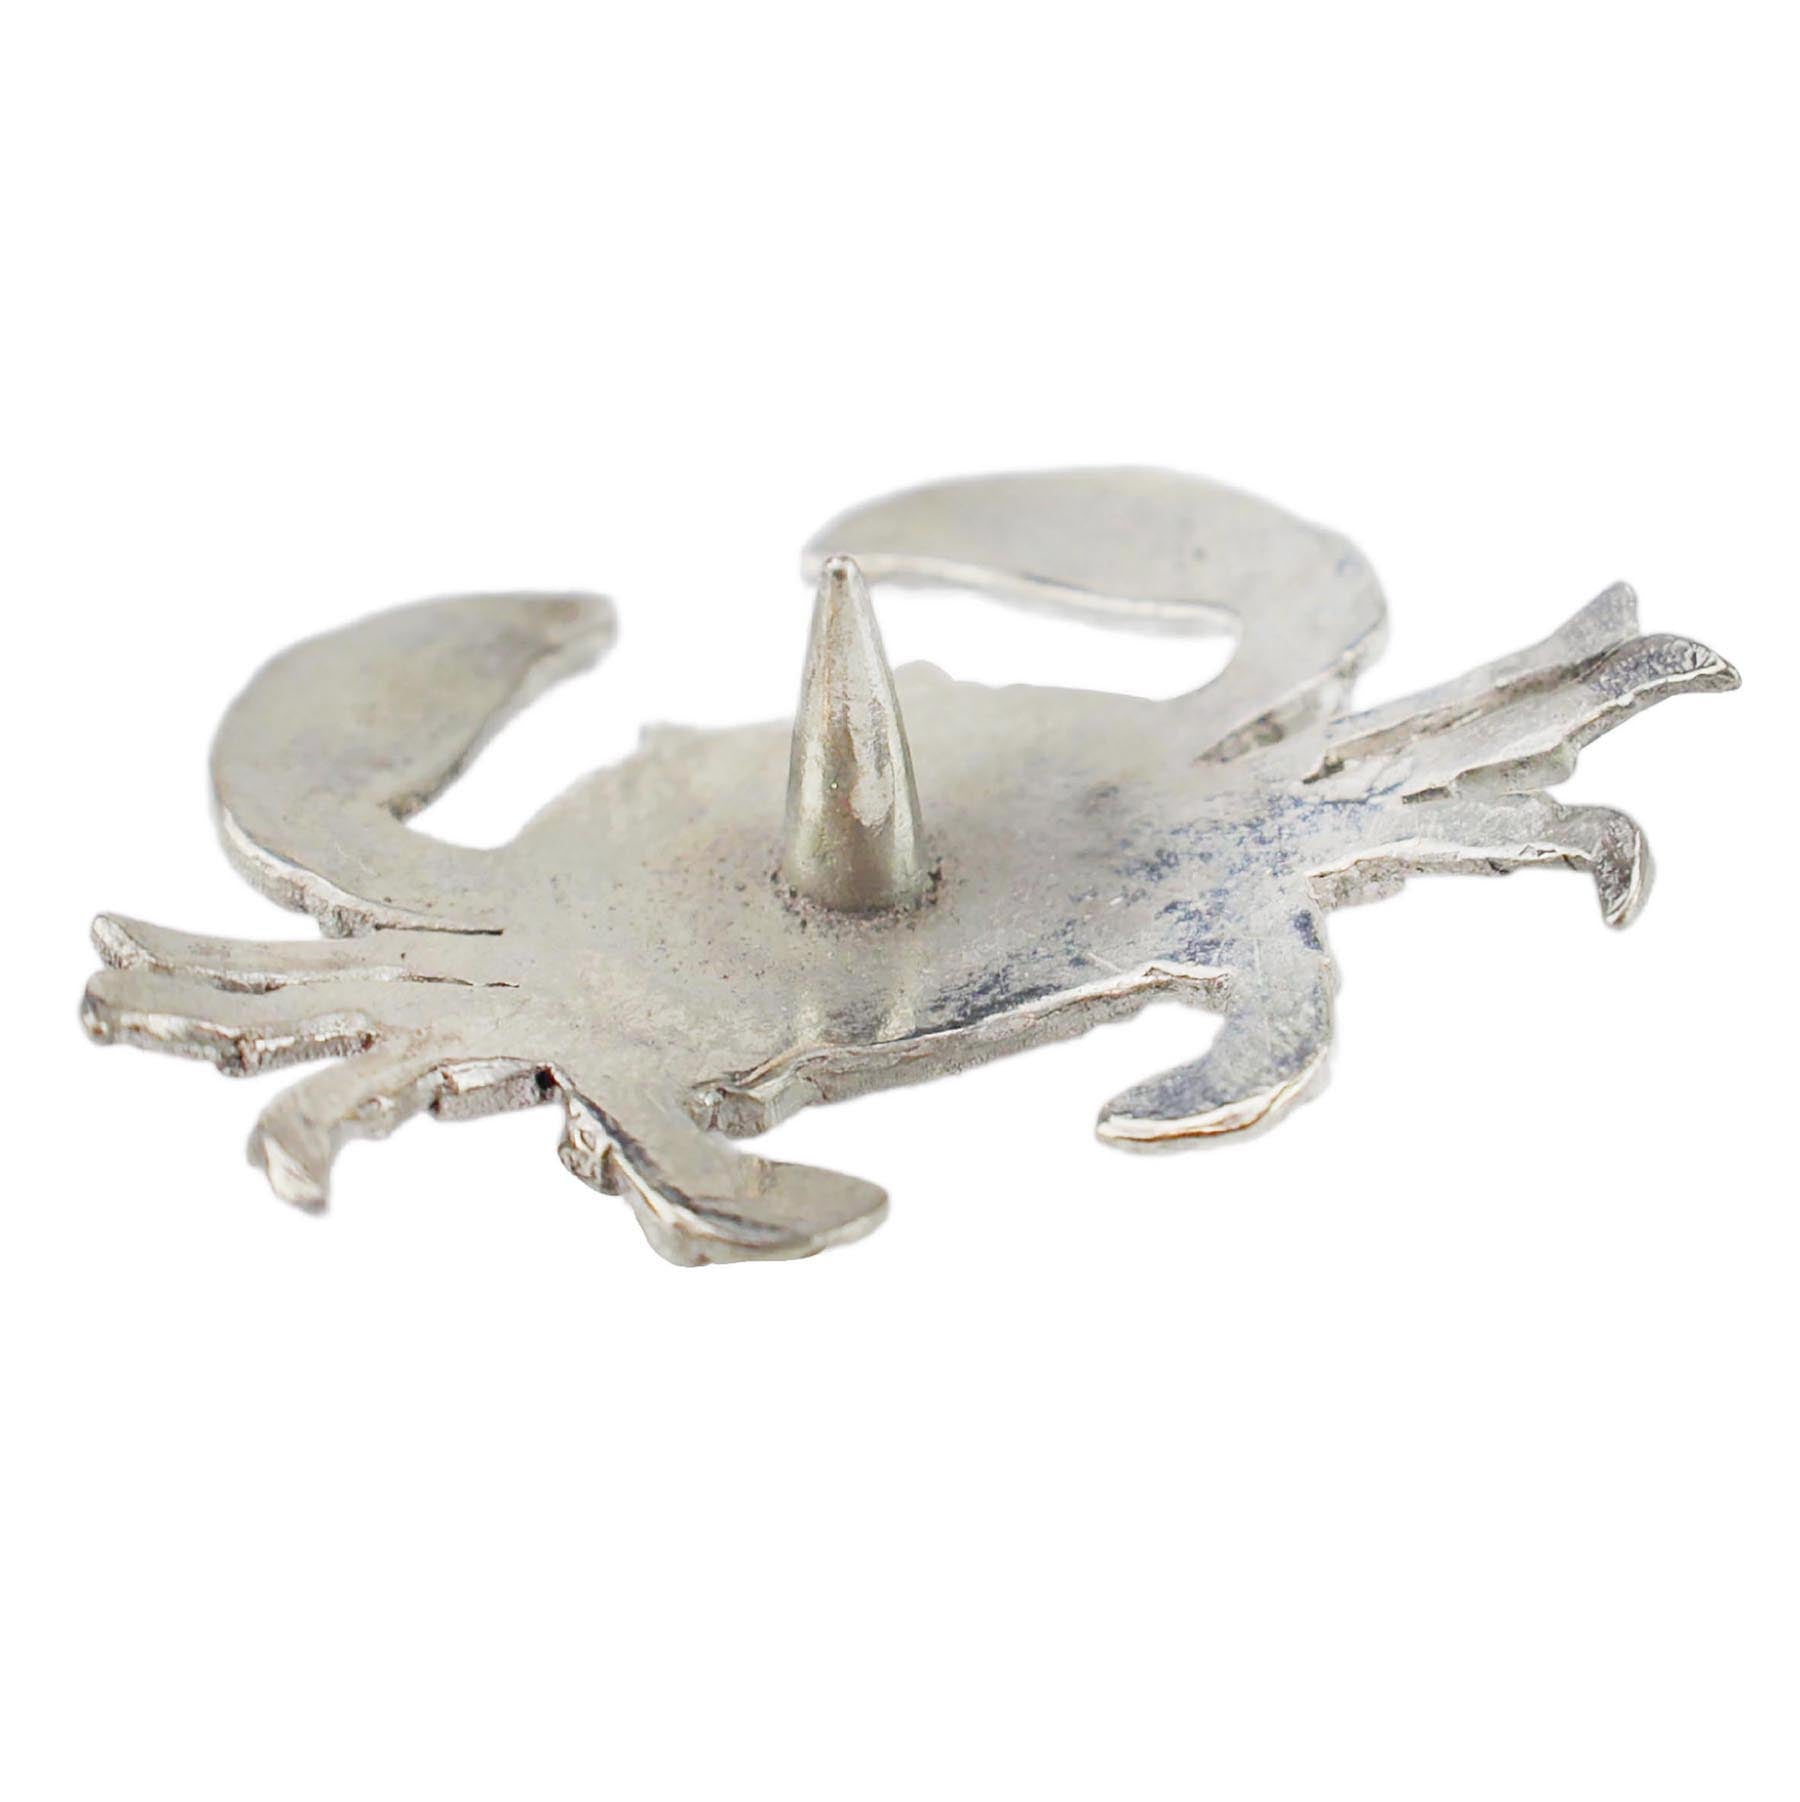 Pewter Crab Candle Pin showing reverse and how the pin sticks out so it can be pushed into a candle